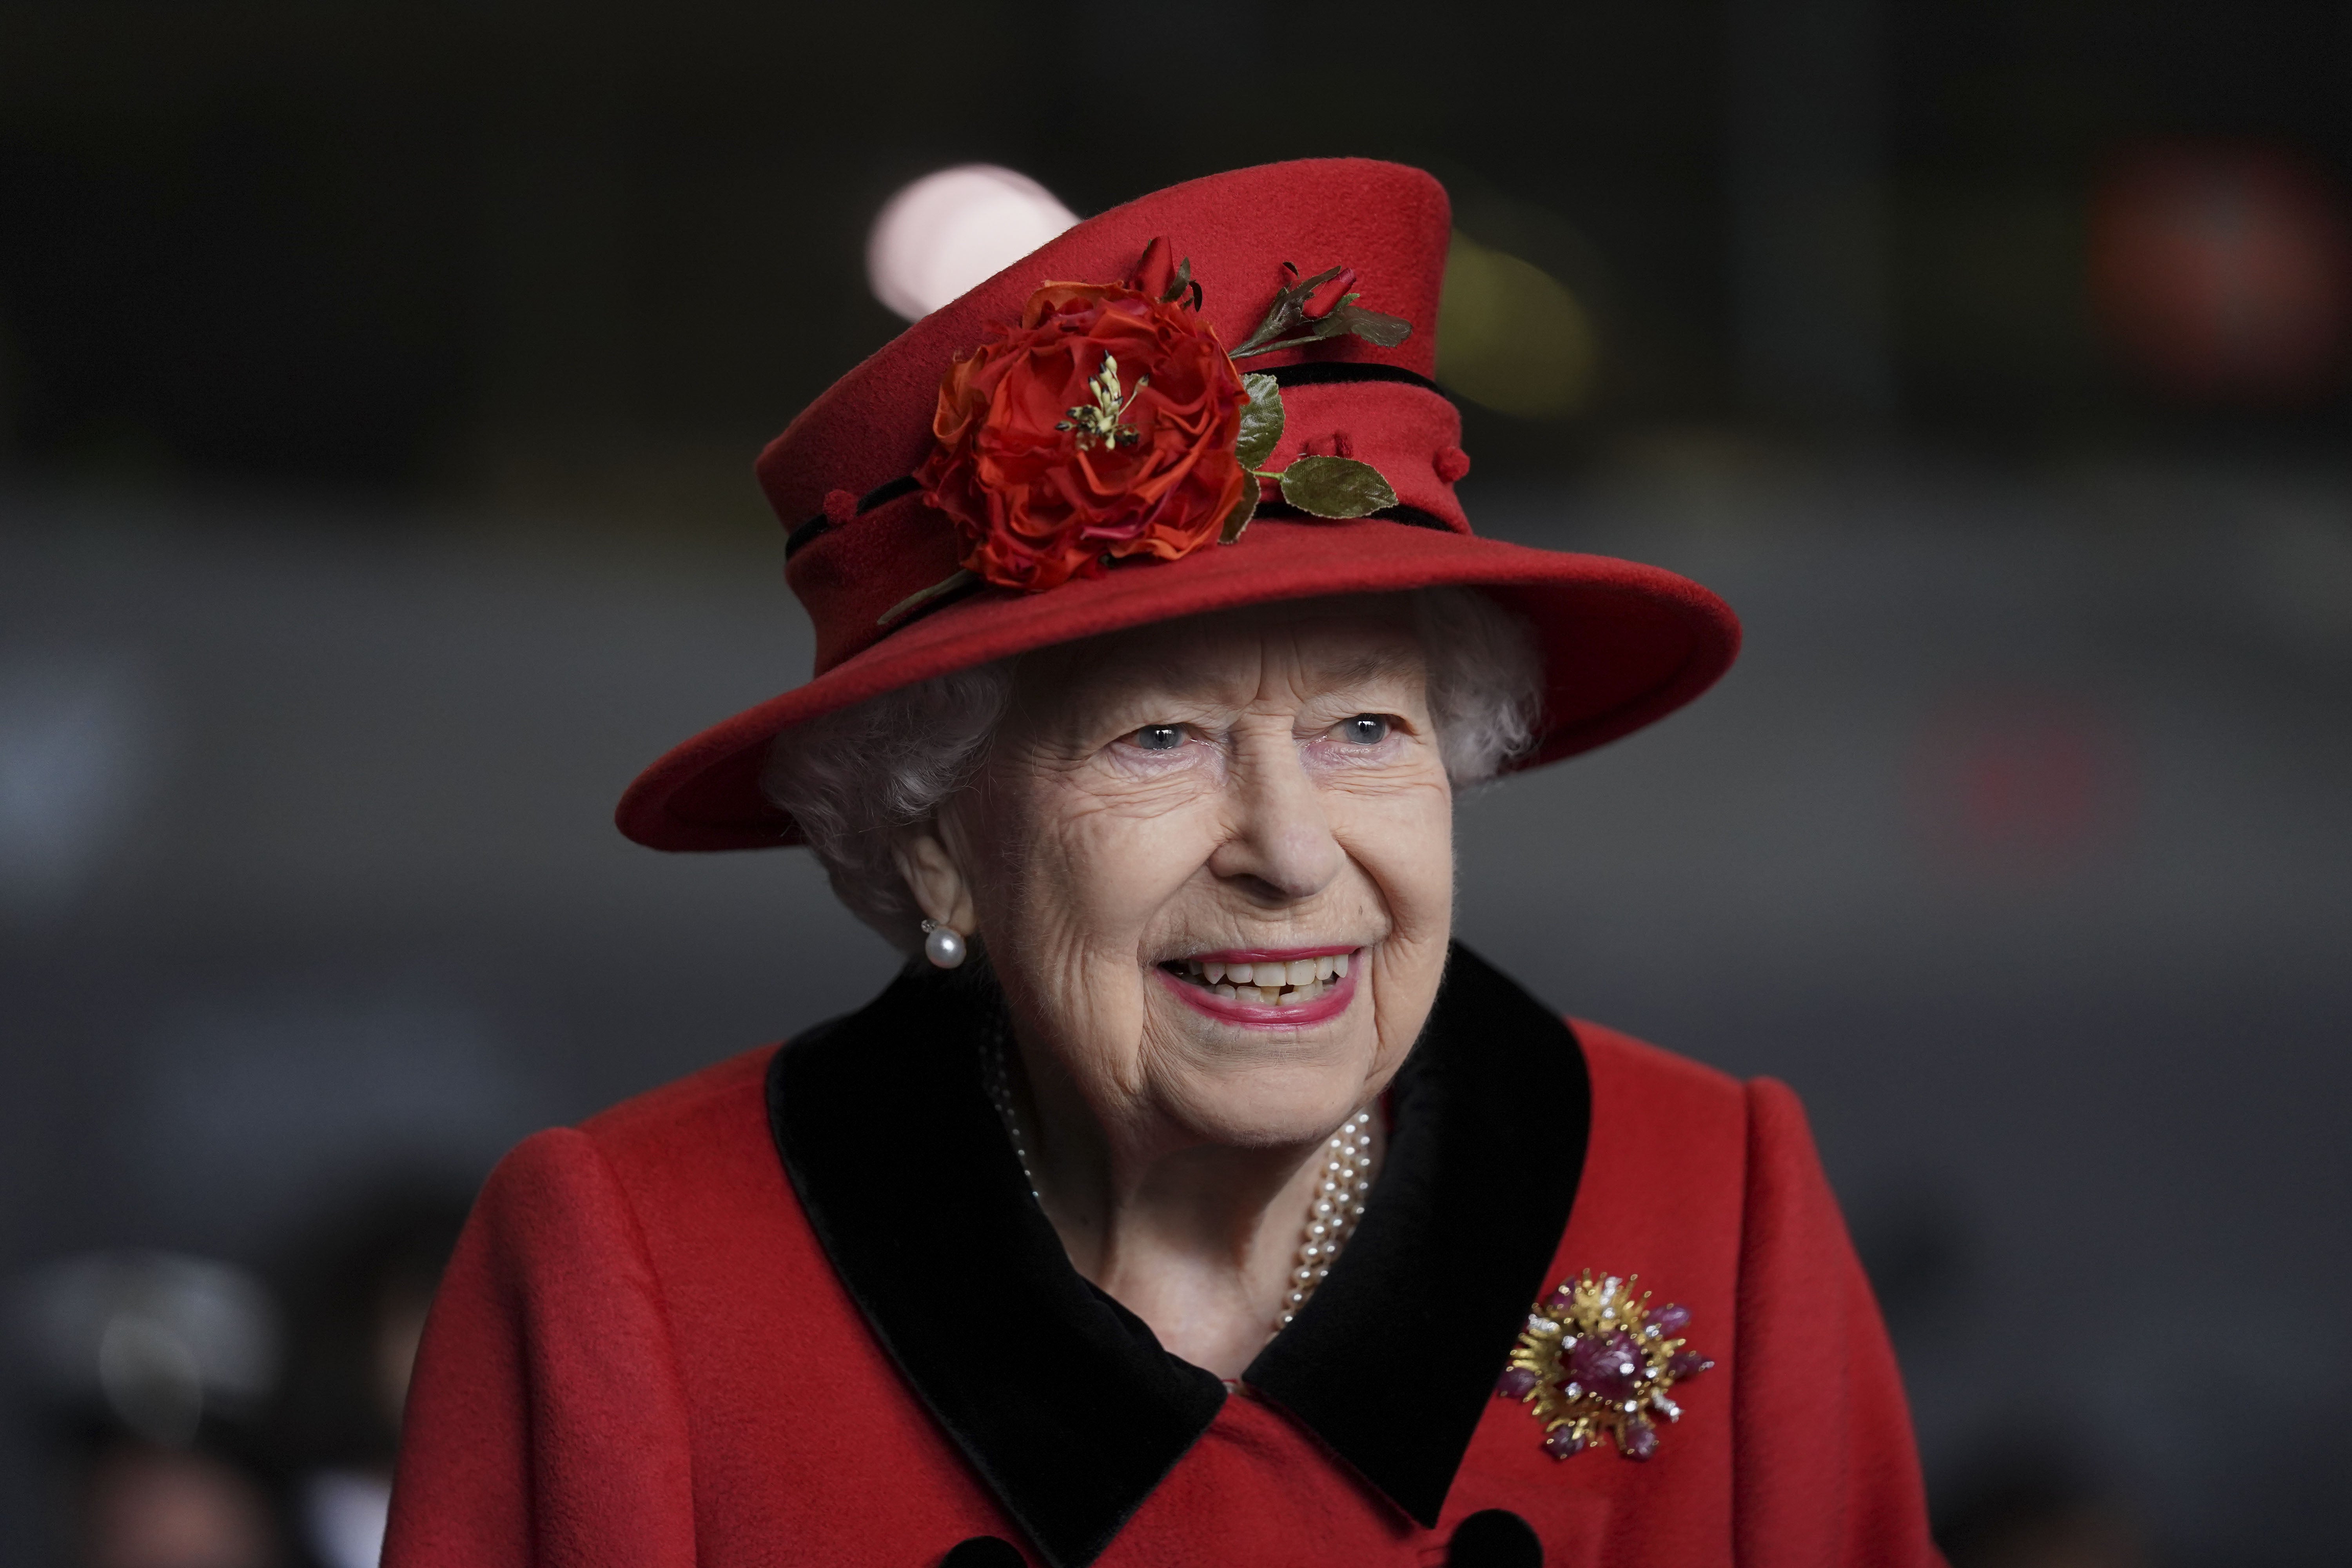 Twitter timelines have been full over the last couple of days with tributes to the late Queen